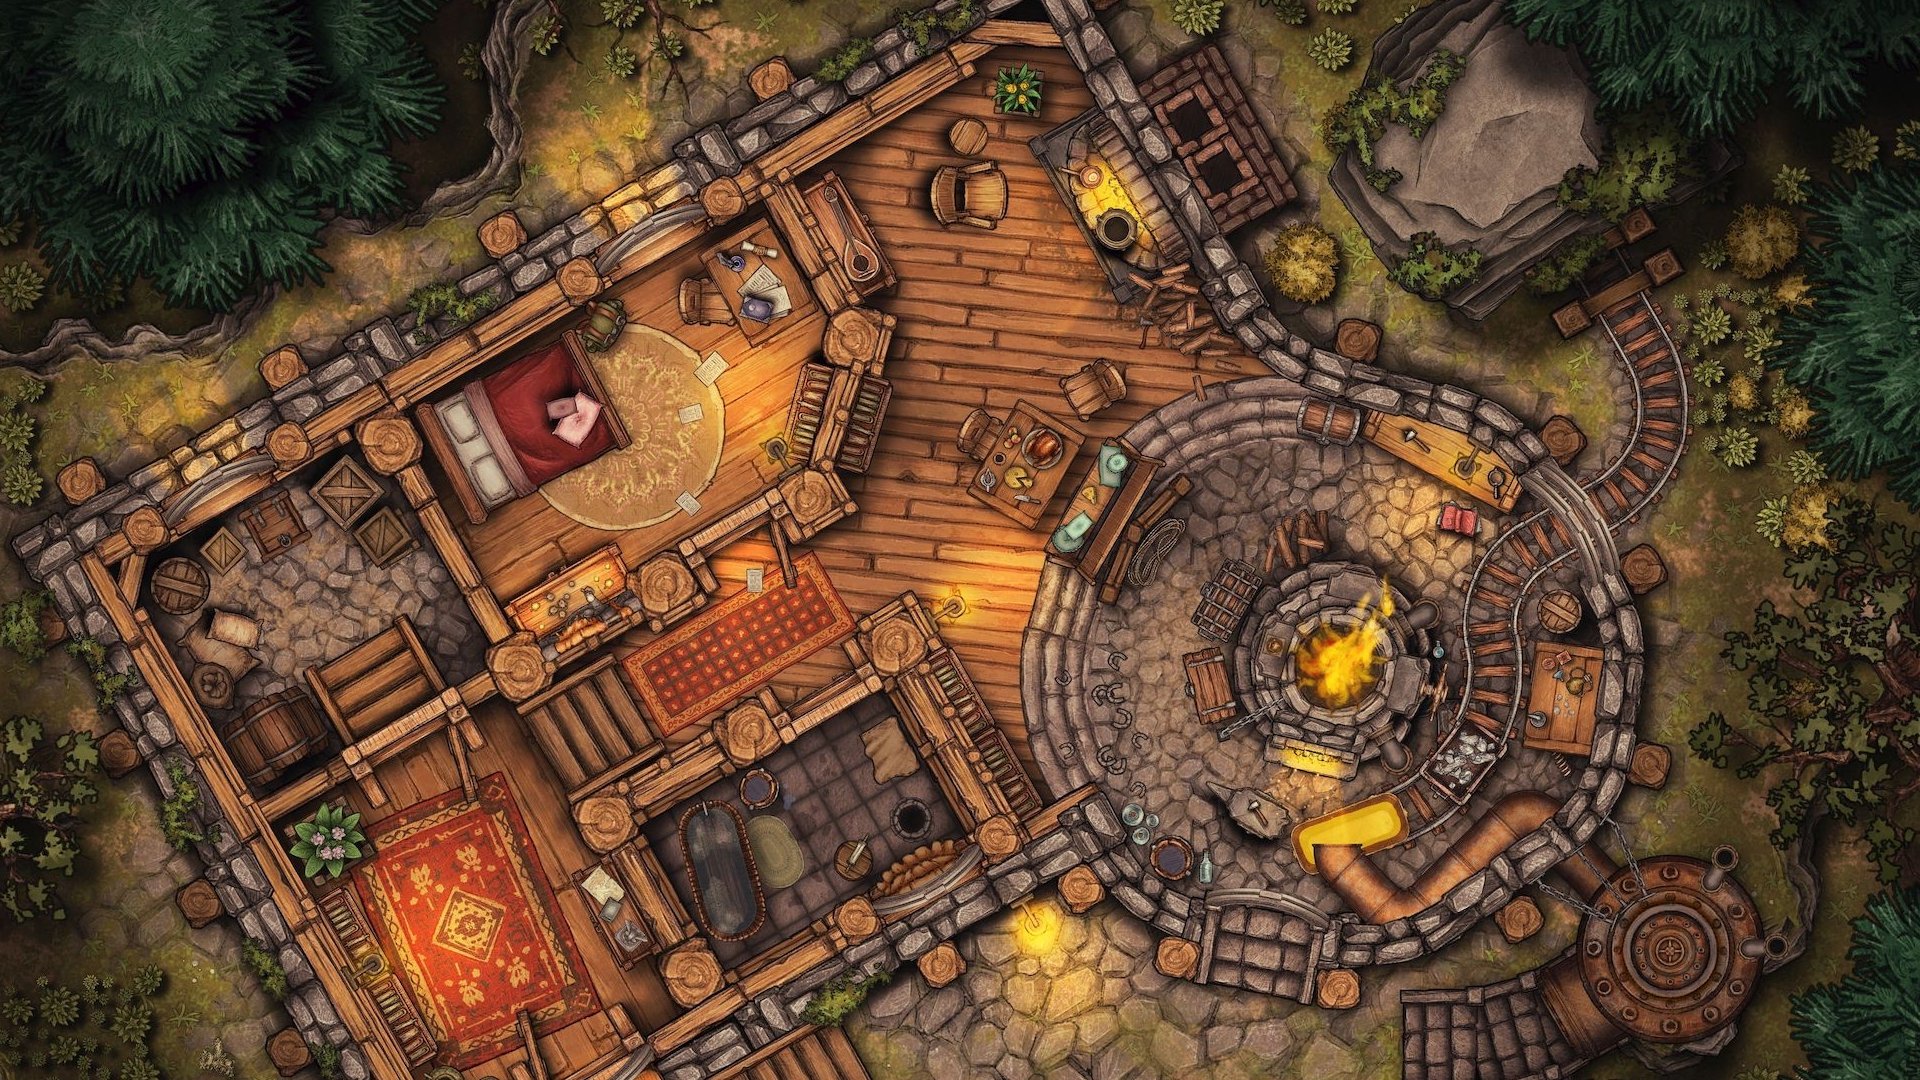 DnD maps and best DnD map makers: author screenshot showing a DnD map of a building from the Inkarnate Pro map maker